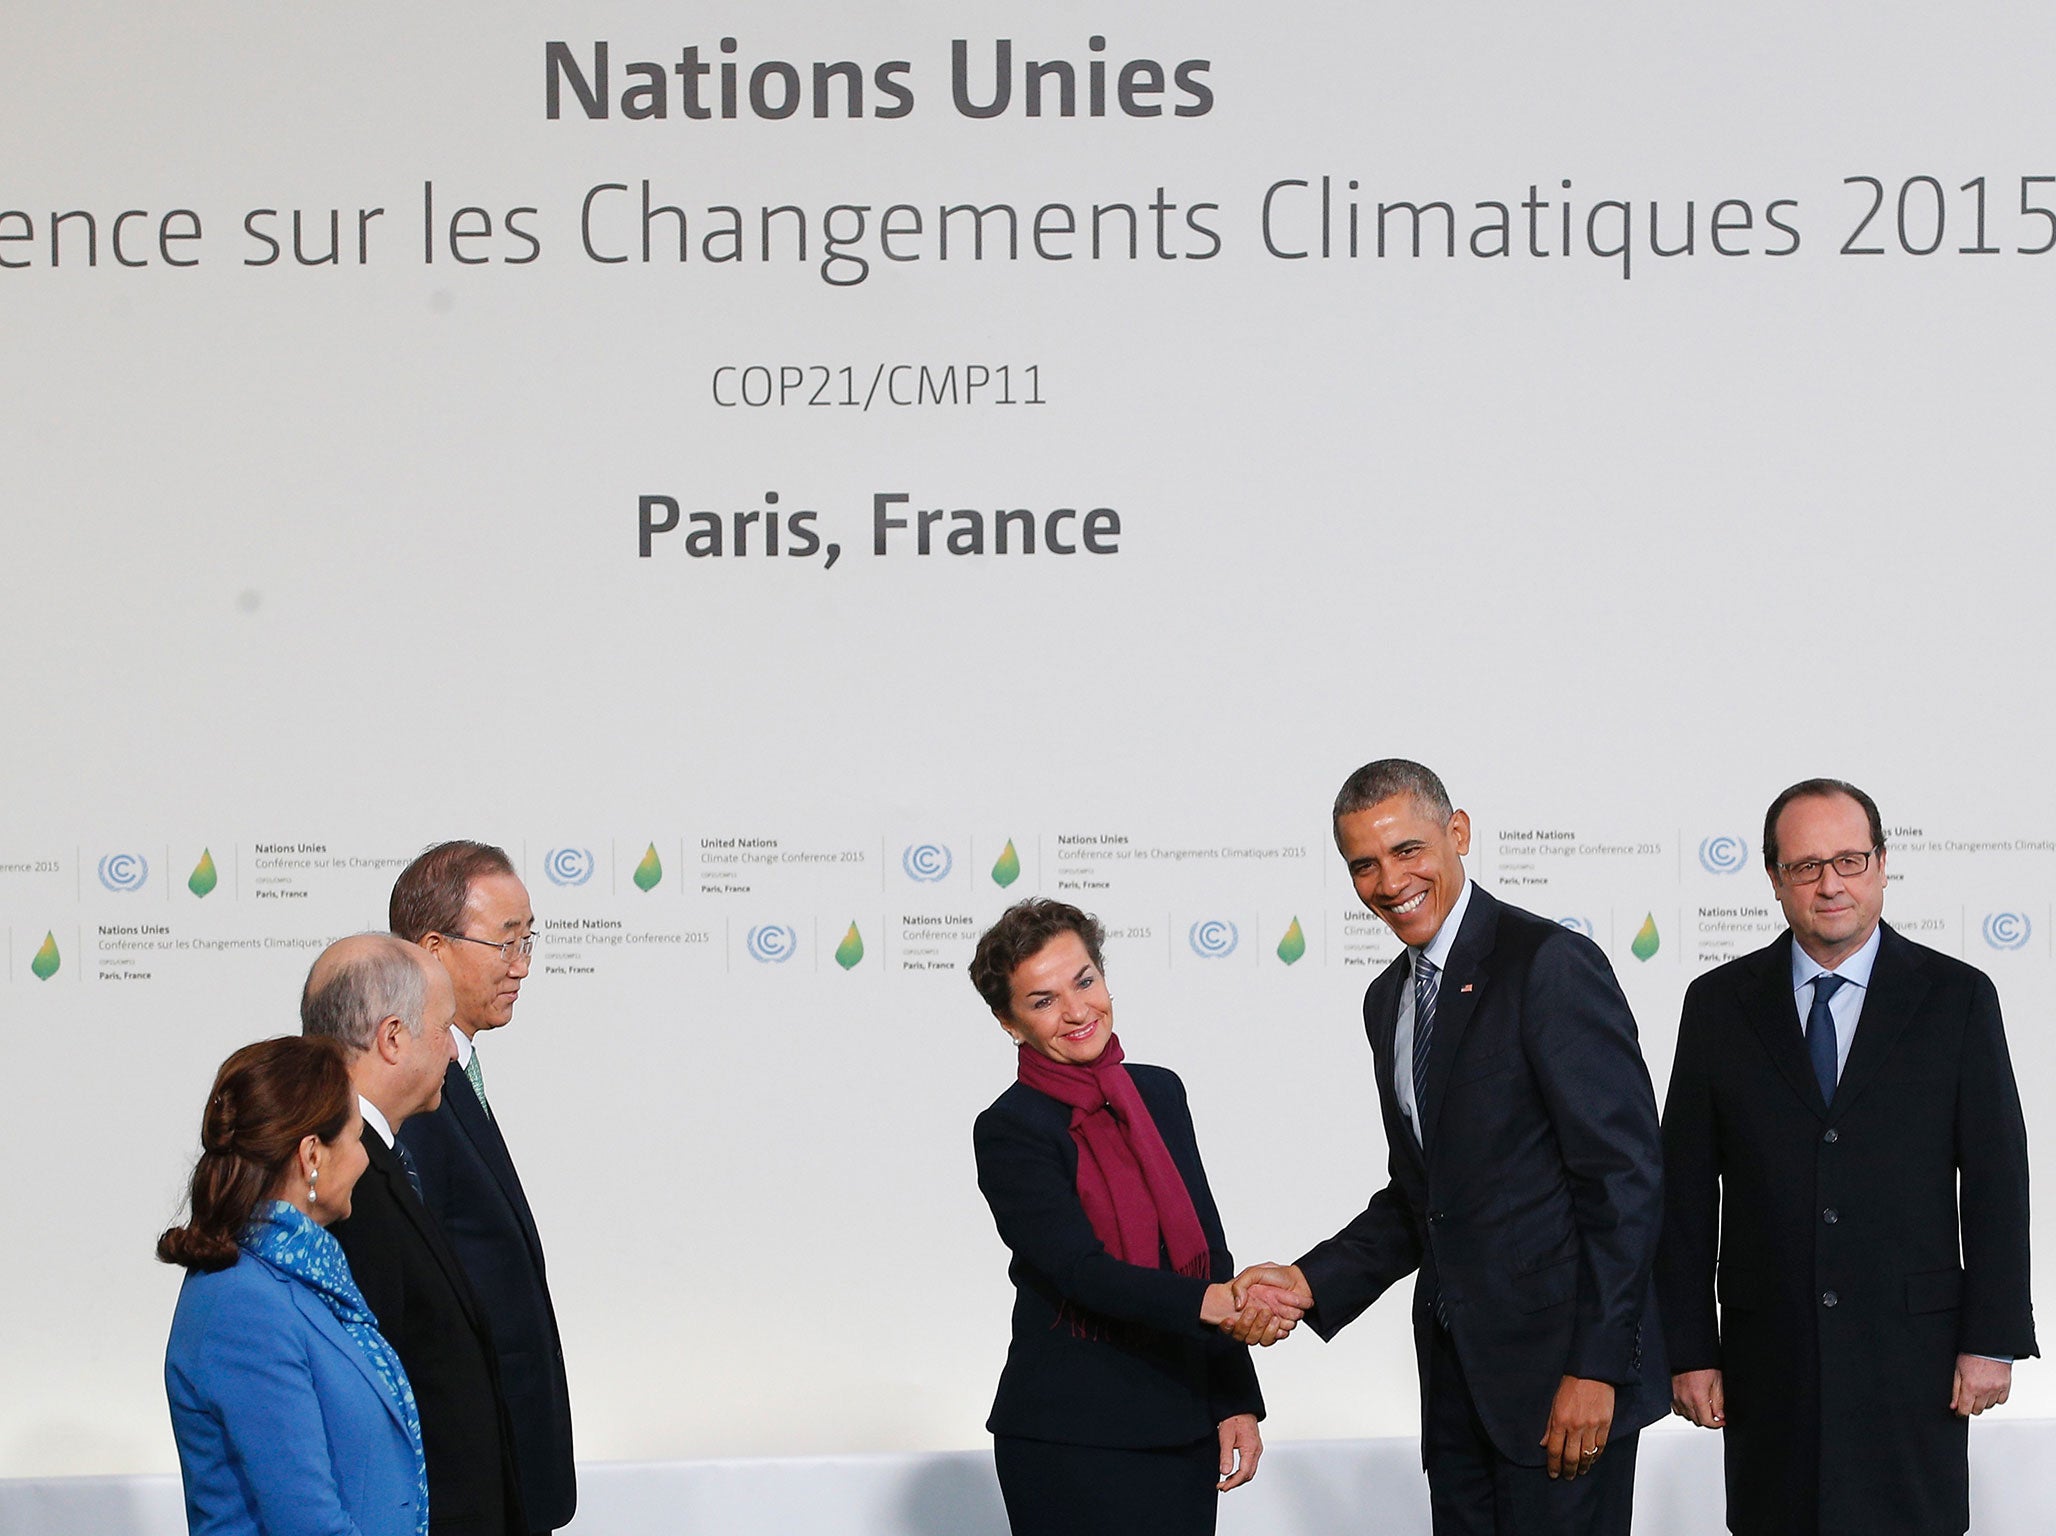 .S. President Barack Obama (2nd R) shakes hand with Executive Secretary of the UN Framework Convention on Climate Change Christiana Figueres, as United Nations Secretary General Ban Ki-moon (3rd L), French Environement minister Segolene Royal (L), French Foreign minister Laurent Fabius (2nd L) and French President Francois Hollande (R) looks on, as they arrive for the COP21, United Nations Climate Change Conference, in Le Bourget, outside Paris